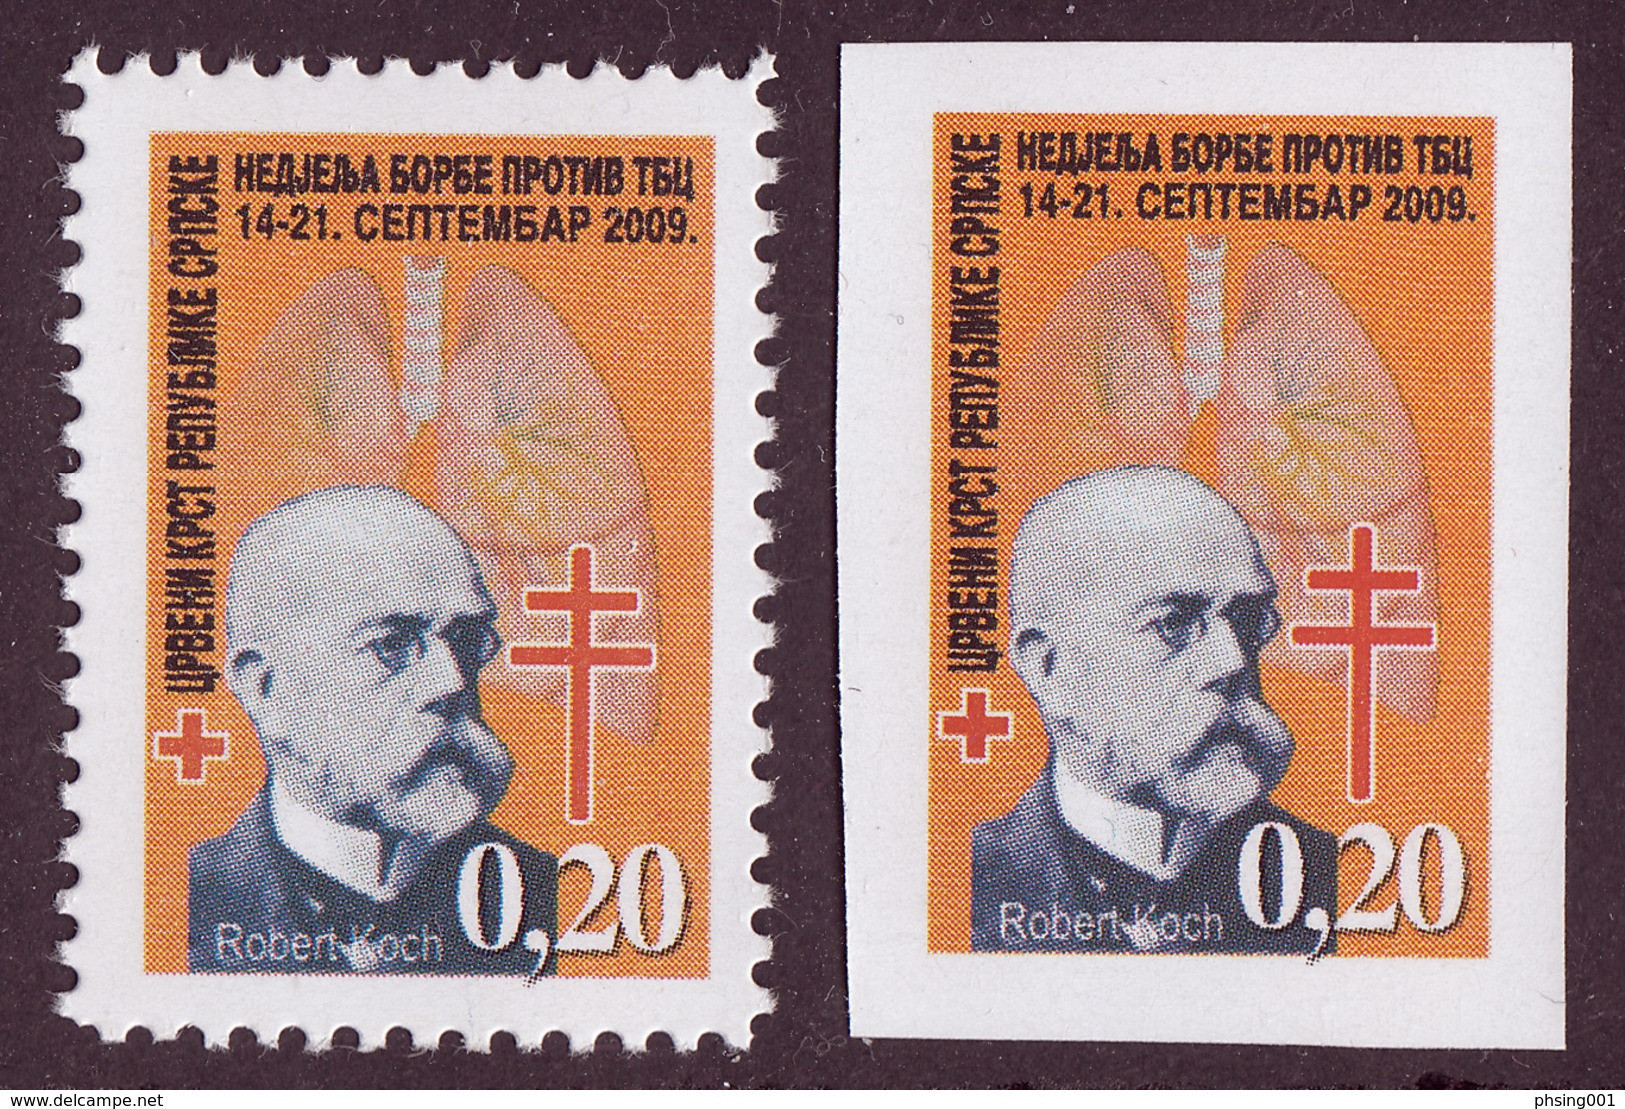 Bosnia Serbia 2009 TBC Tuberculosis Red Cross Robert Koch, Tax Charity Surcharge Stamps Perforated + Imperforated MNH - Bosnie-Herzegovine